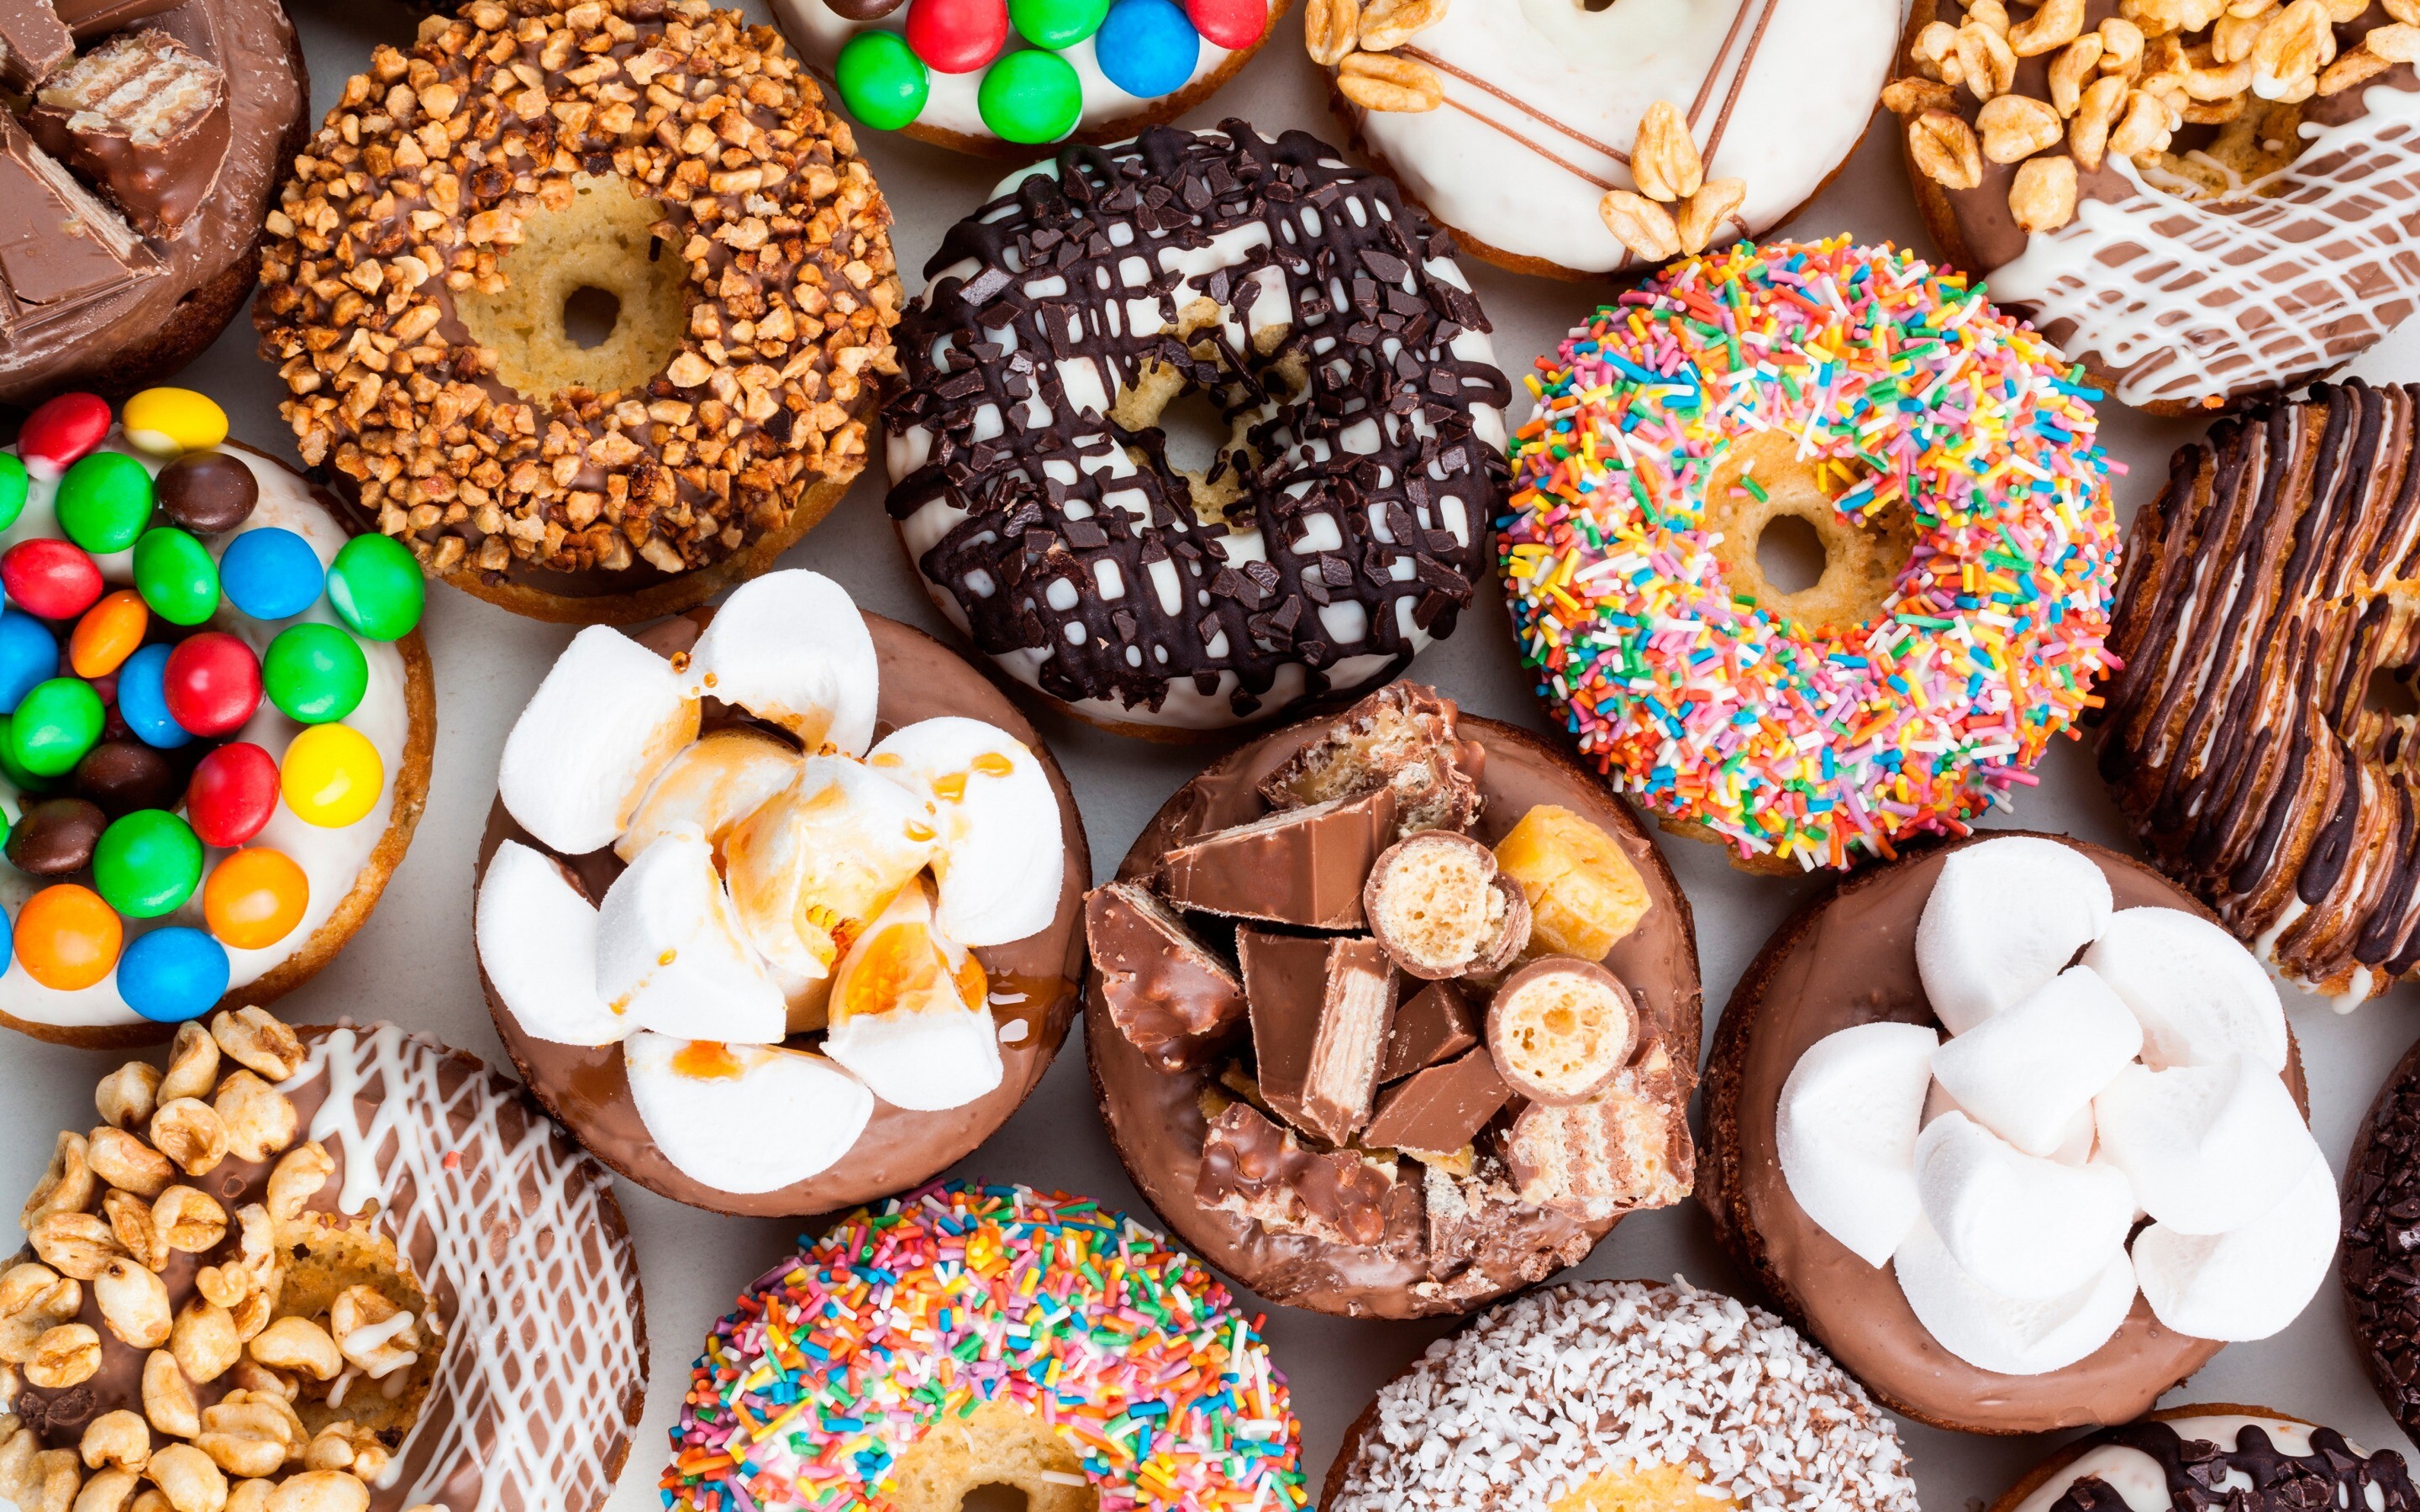 Sweet donuts marshmallows wallpapers, Irresistible baked goods, Delicious delicacies, Decadent treats, 2880x1800 HD Desktop